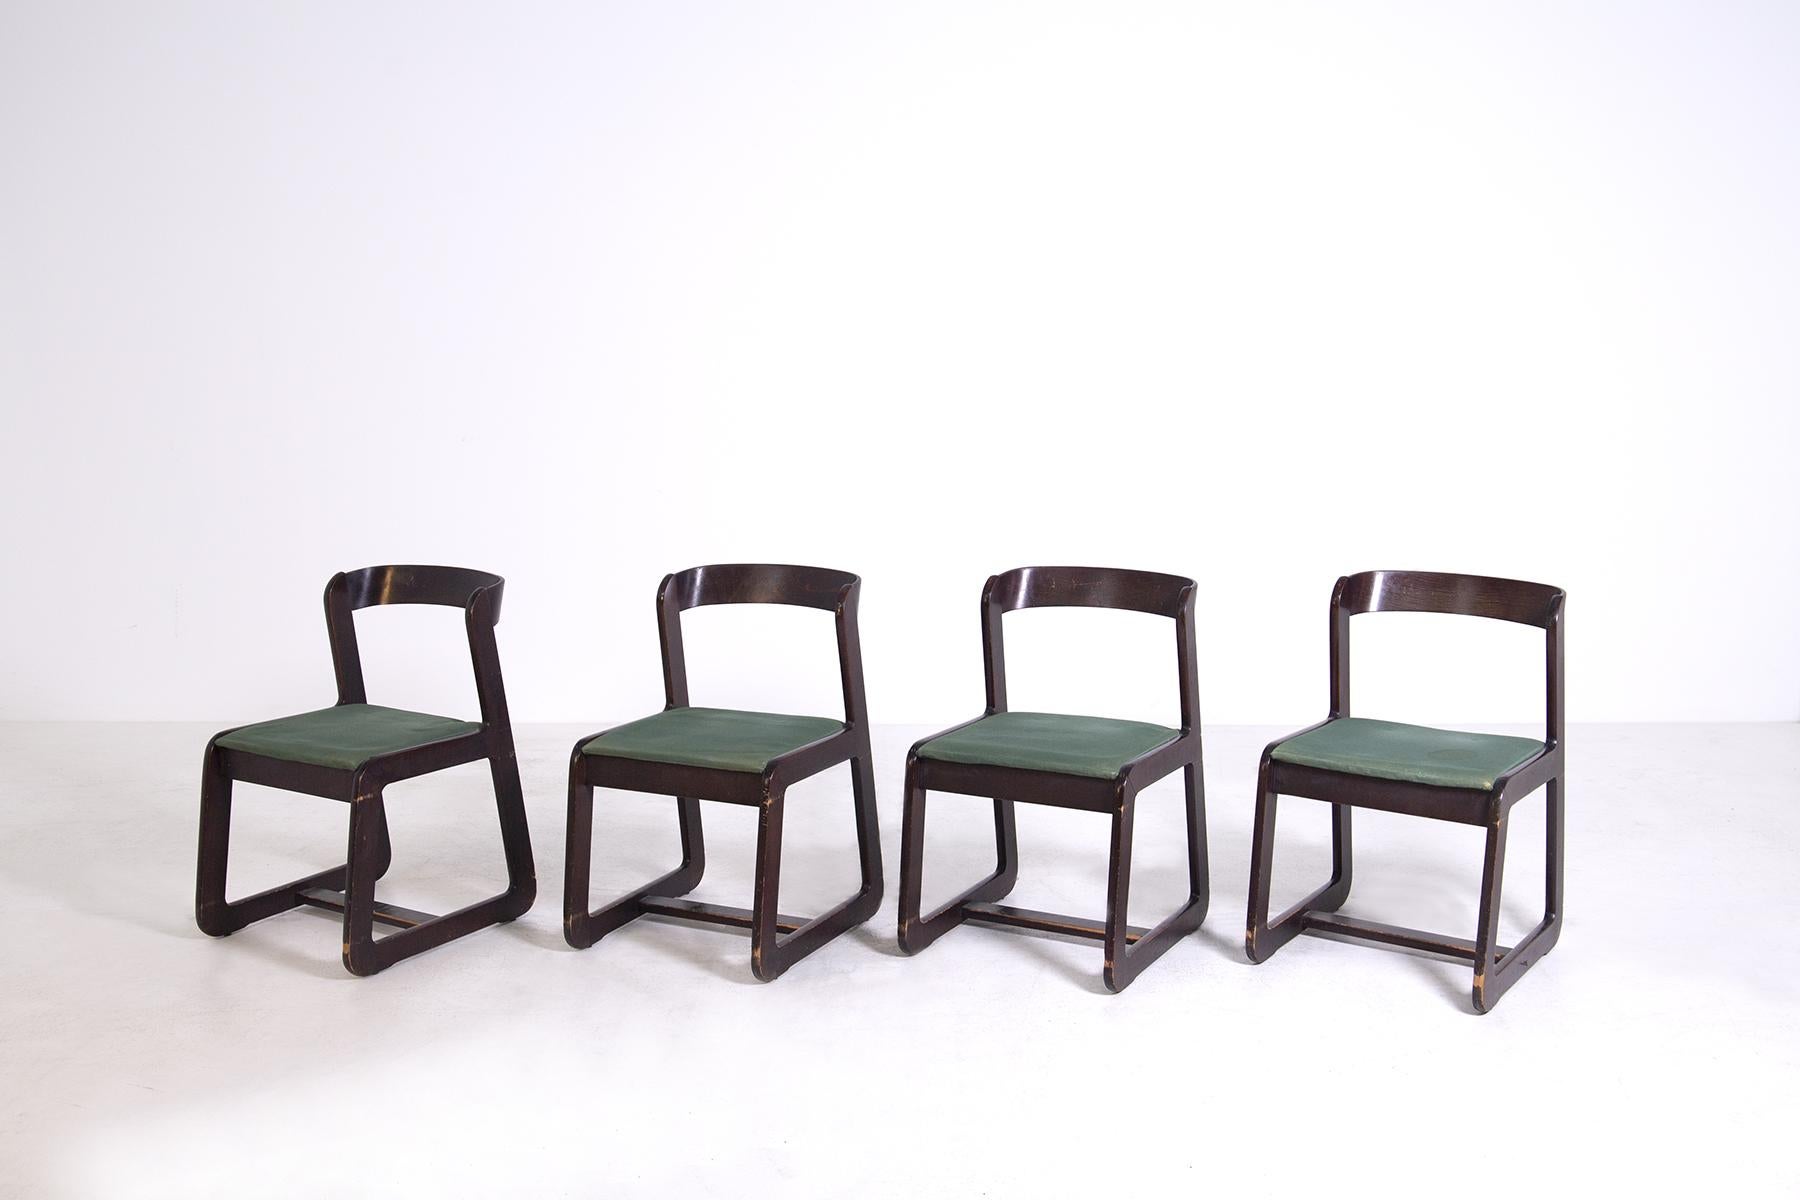 Beautiful set of chairs designed by the great photographer and designer Willy Rizzo for the manufacture of Mario Sabot in 1970.
The seat in green fabric and the structure in fine wood, have geometric shapes, often used by Willy Rizzo,